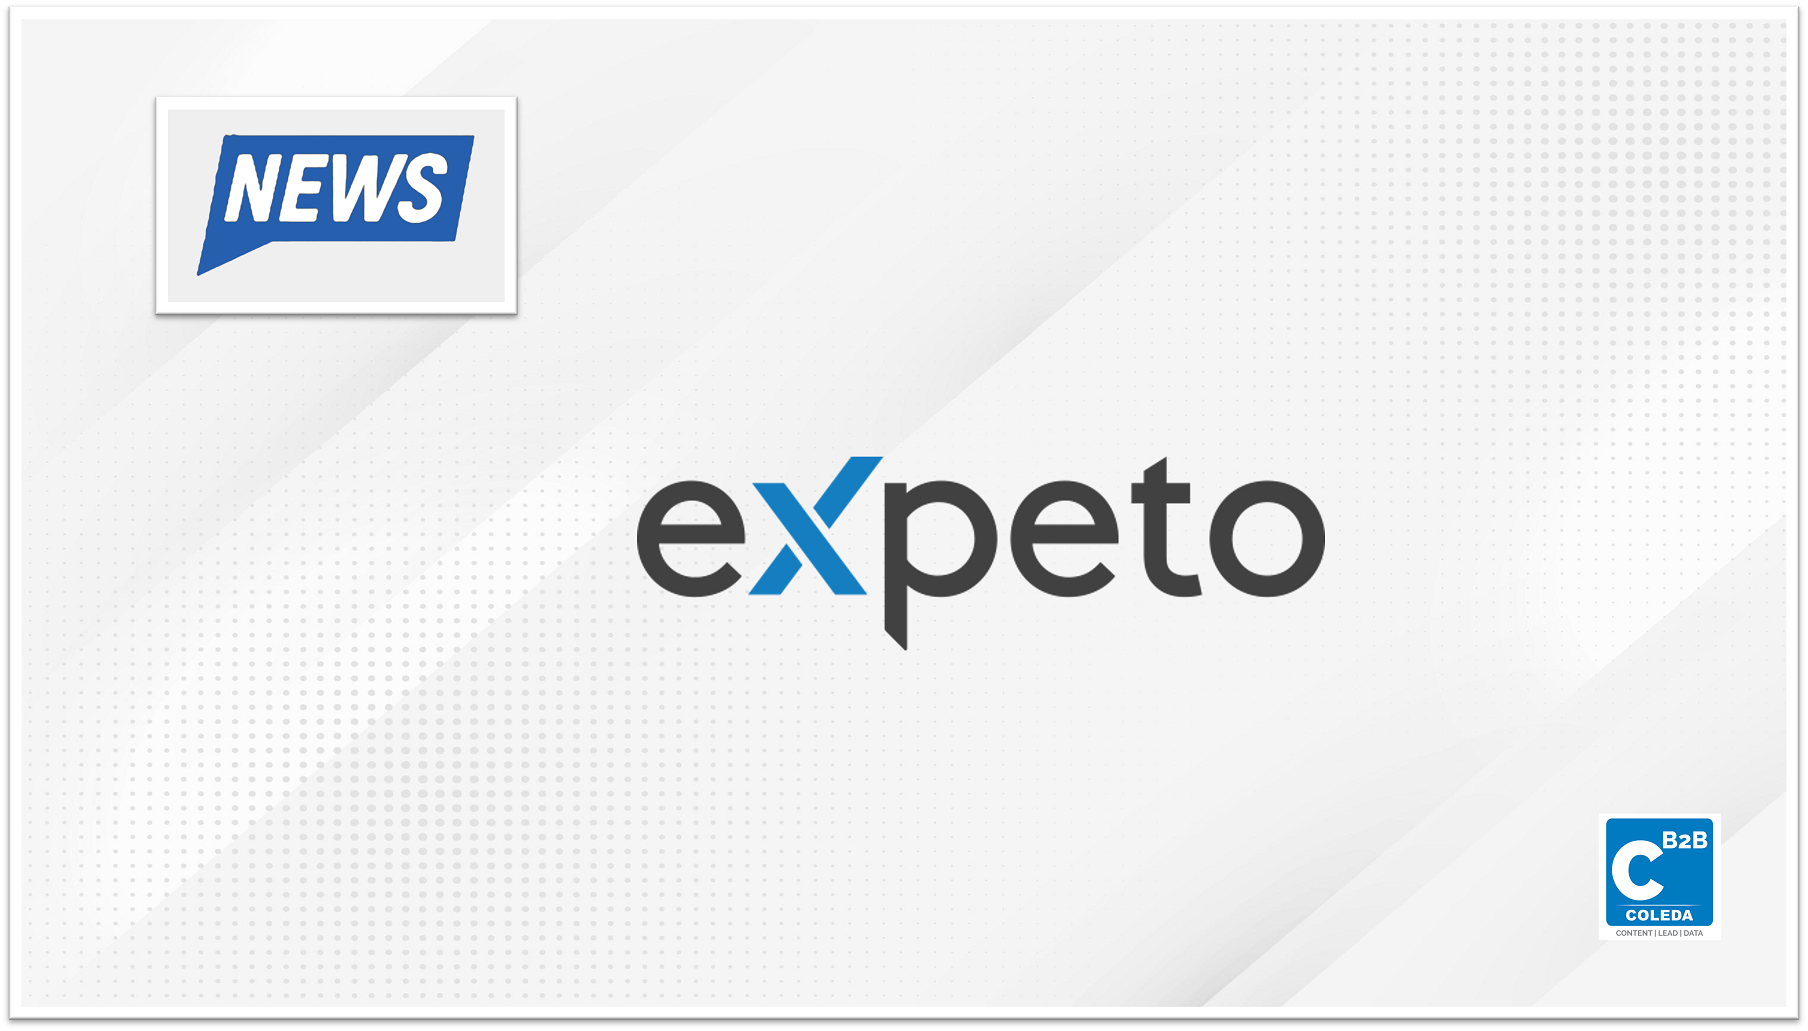 Expeto Collaborates with Intel